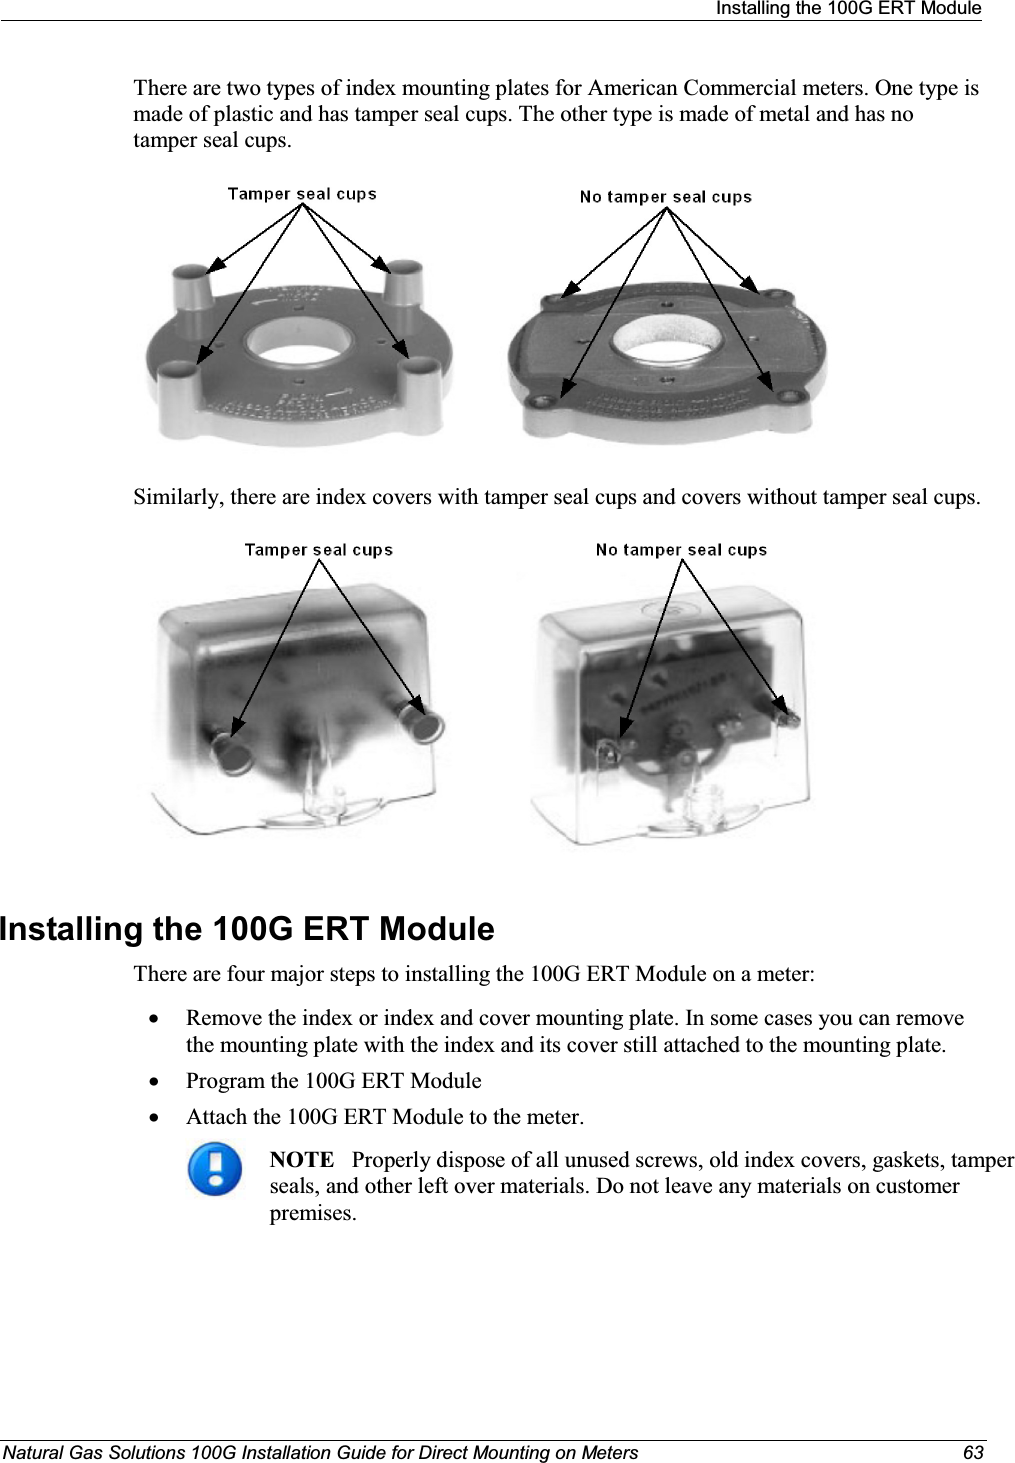 Installing the 100G ERT ModuleNatural Gas Solutions 100G Installation Guide for Direct Mounting on Meters 63There are two types of index mounting plates for American Commercial meters. One type is made of plastic and has tamper seal cups. The other type is made of metal and has no tamper seal cups.Similarly, there are index covers with tamper seal cups and covers without tamper seal cups.Installing the 100G ERT Module There are four major steps to installing the 100G ERT Module on a meter: xRemove the index or index and cover mounting plate. In some cases you can remove the mounting plate with the index and its cover still attached to the mounting plate. xProgram the 100G ERT Module xAttach the 100G ERT Module to the meter. NOTE Properly dispose of all unused screws, old index covers, gaskets, tamper seals, and other left over materials. Do not leave any materials on customer premises. 